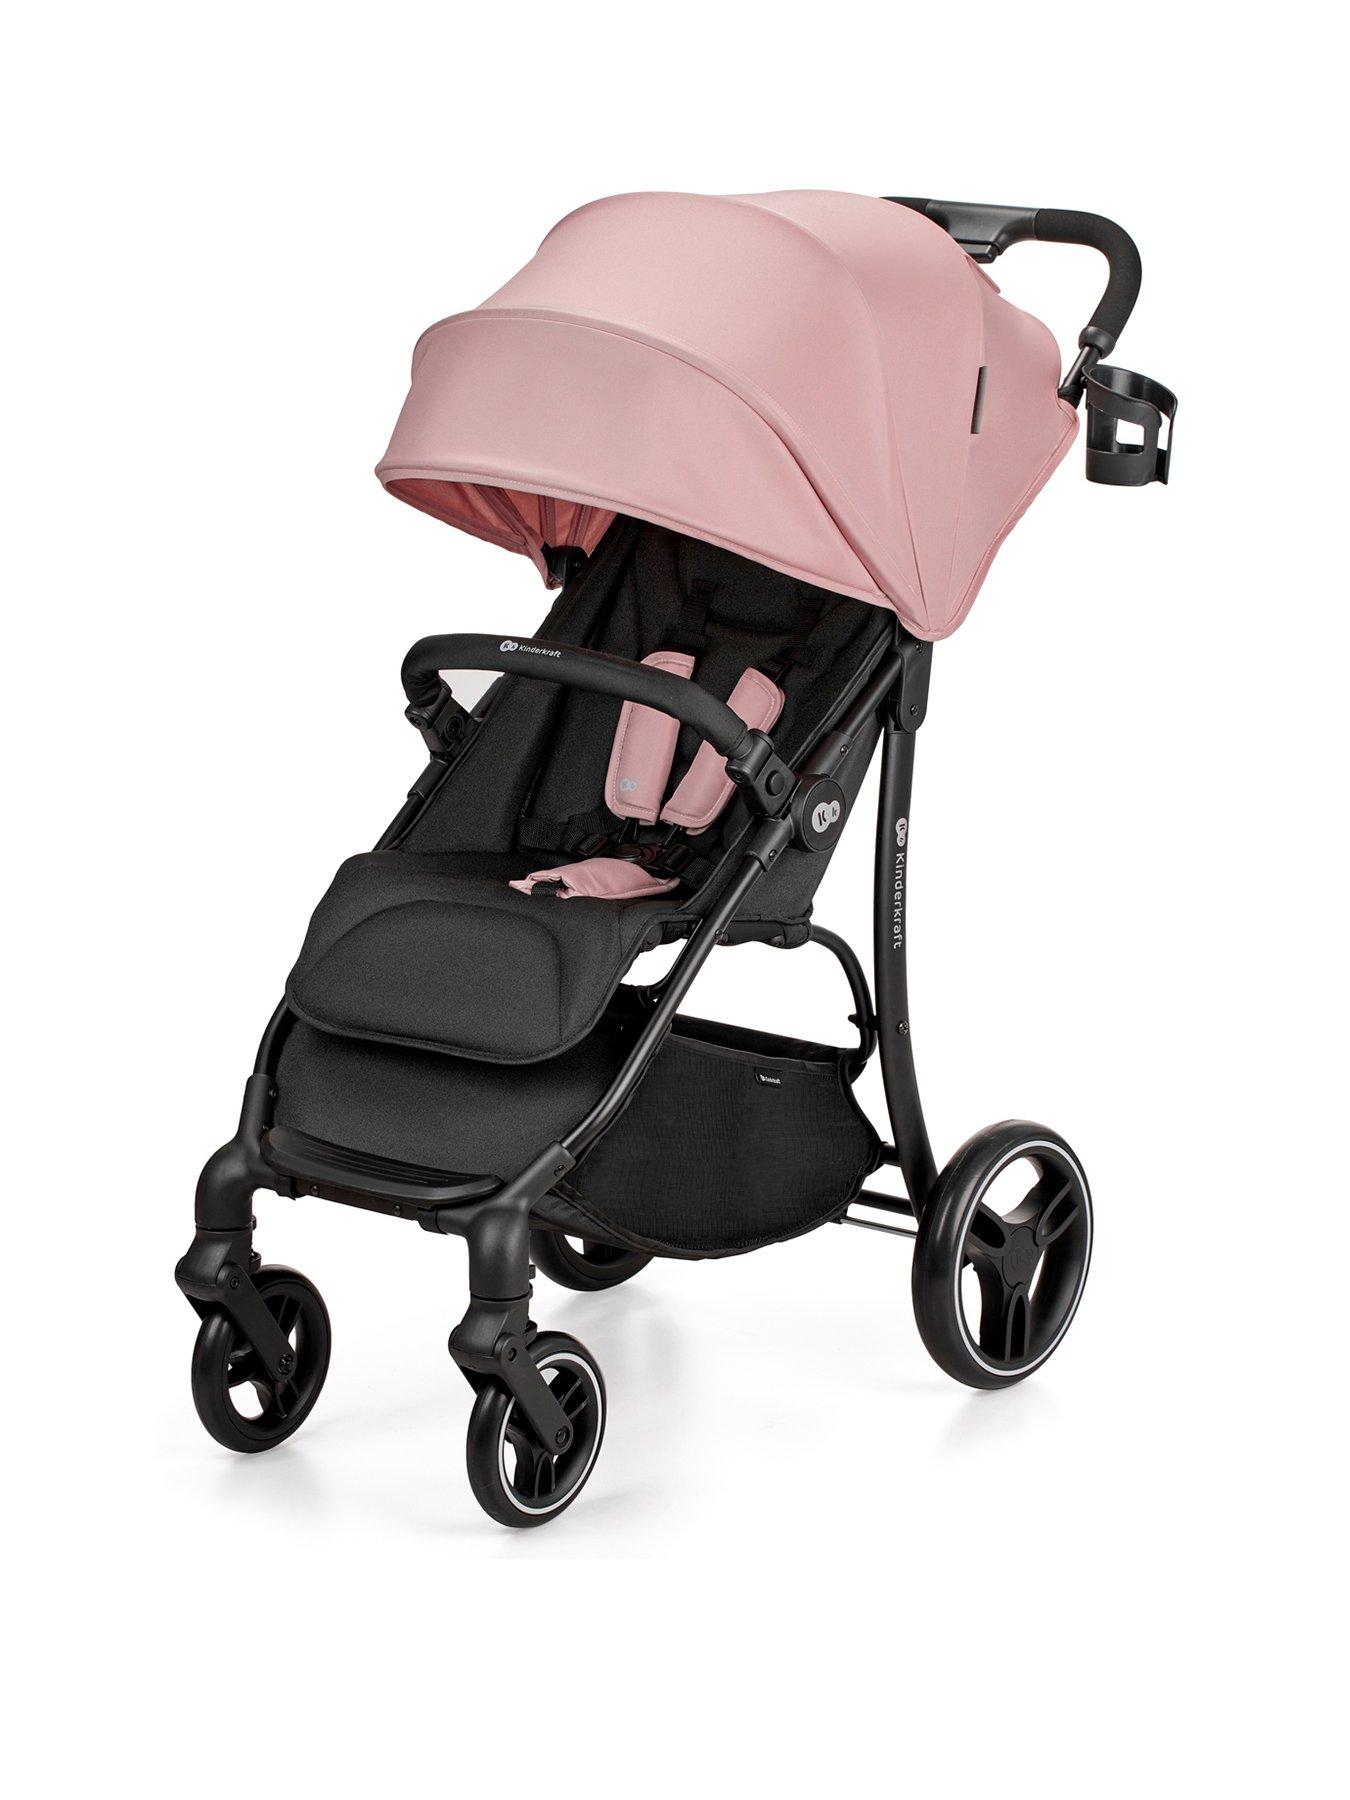 The Kinderkraft NUBI 2 is becoming a really popular choice for 2023! ✨